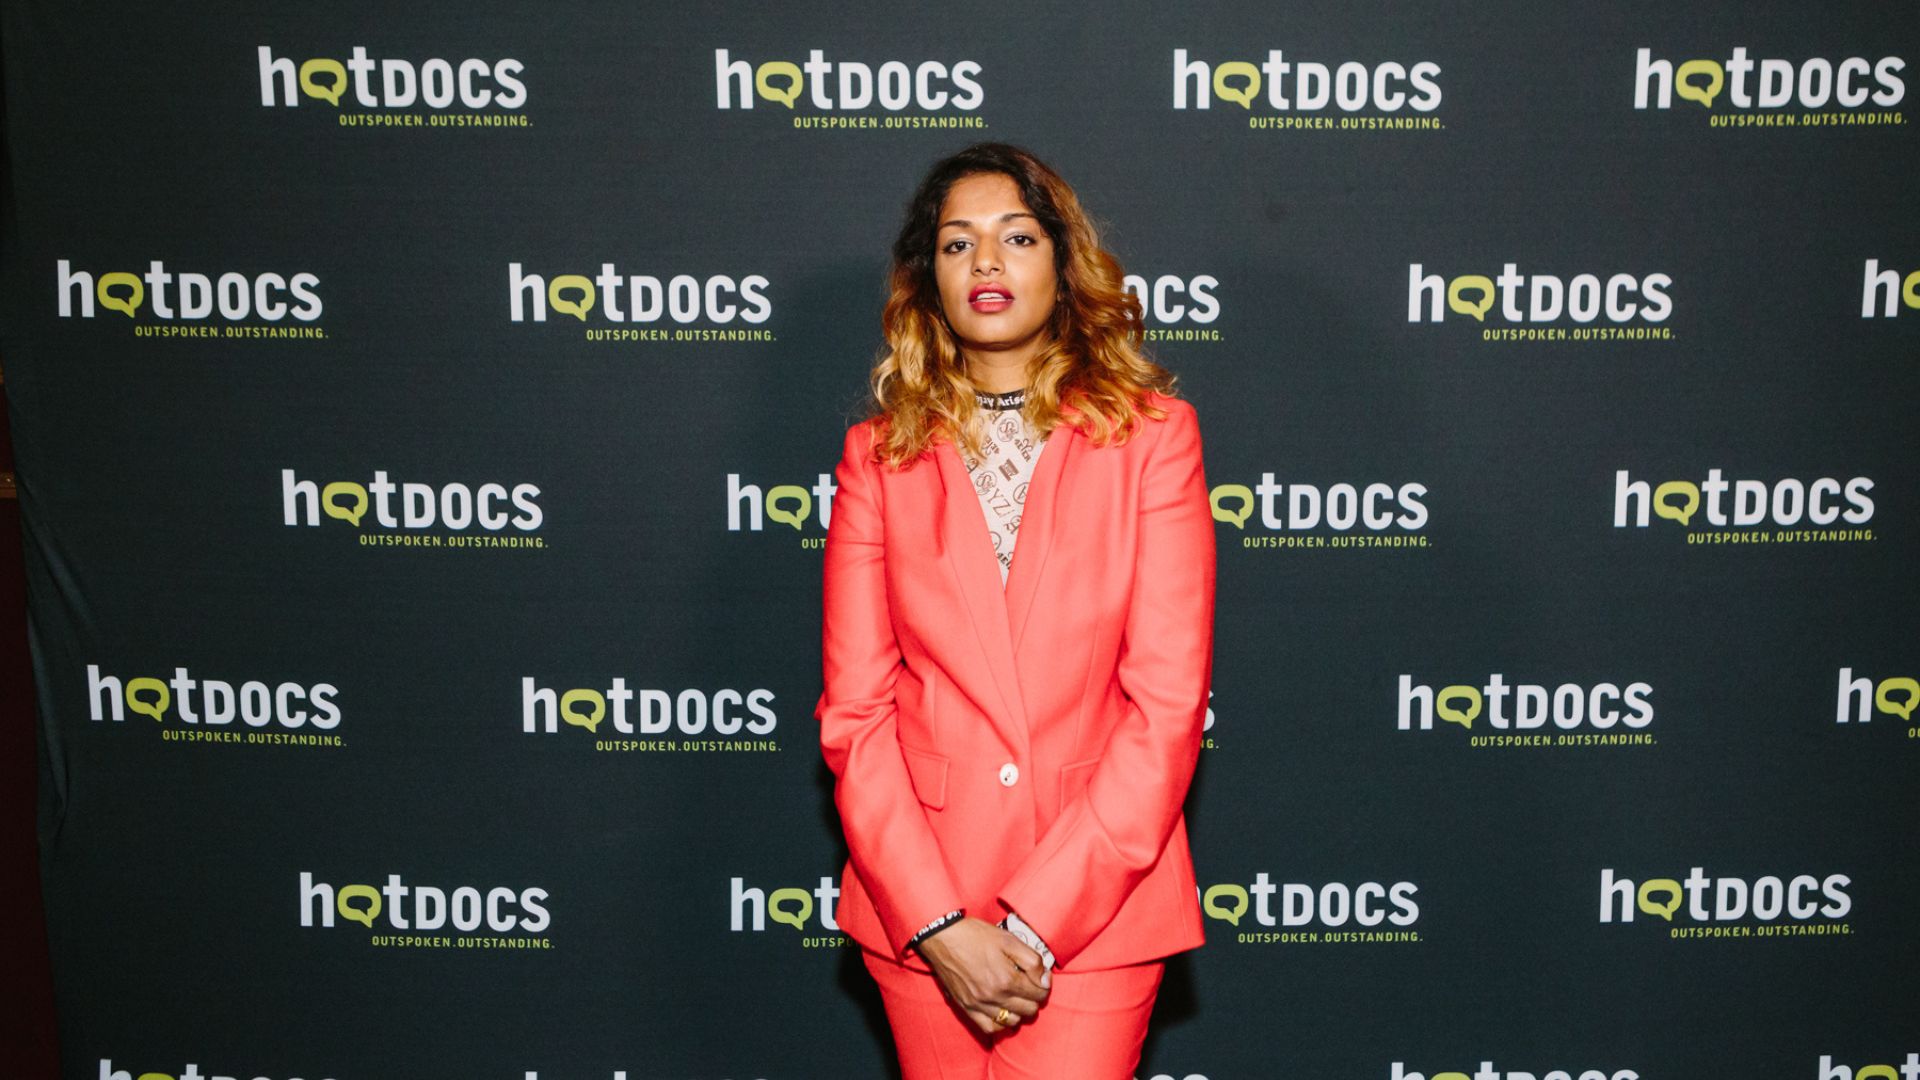 Music artist M.I.A. stands in front of a Hot Docs logo backdrop.